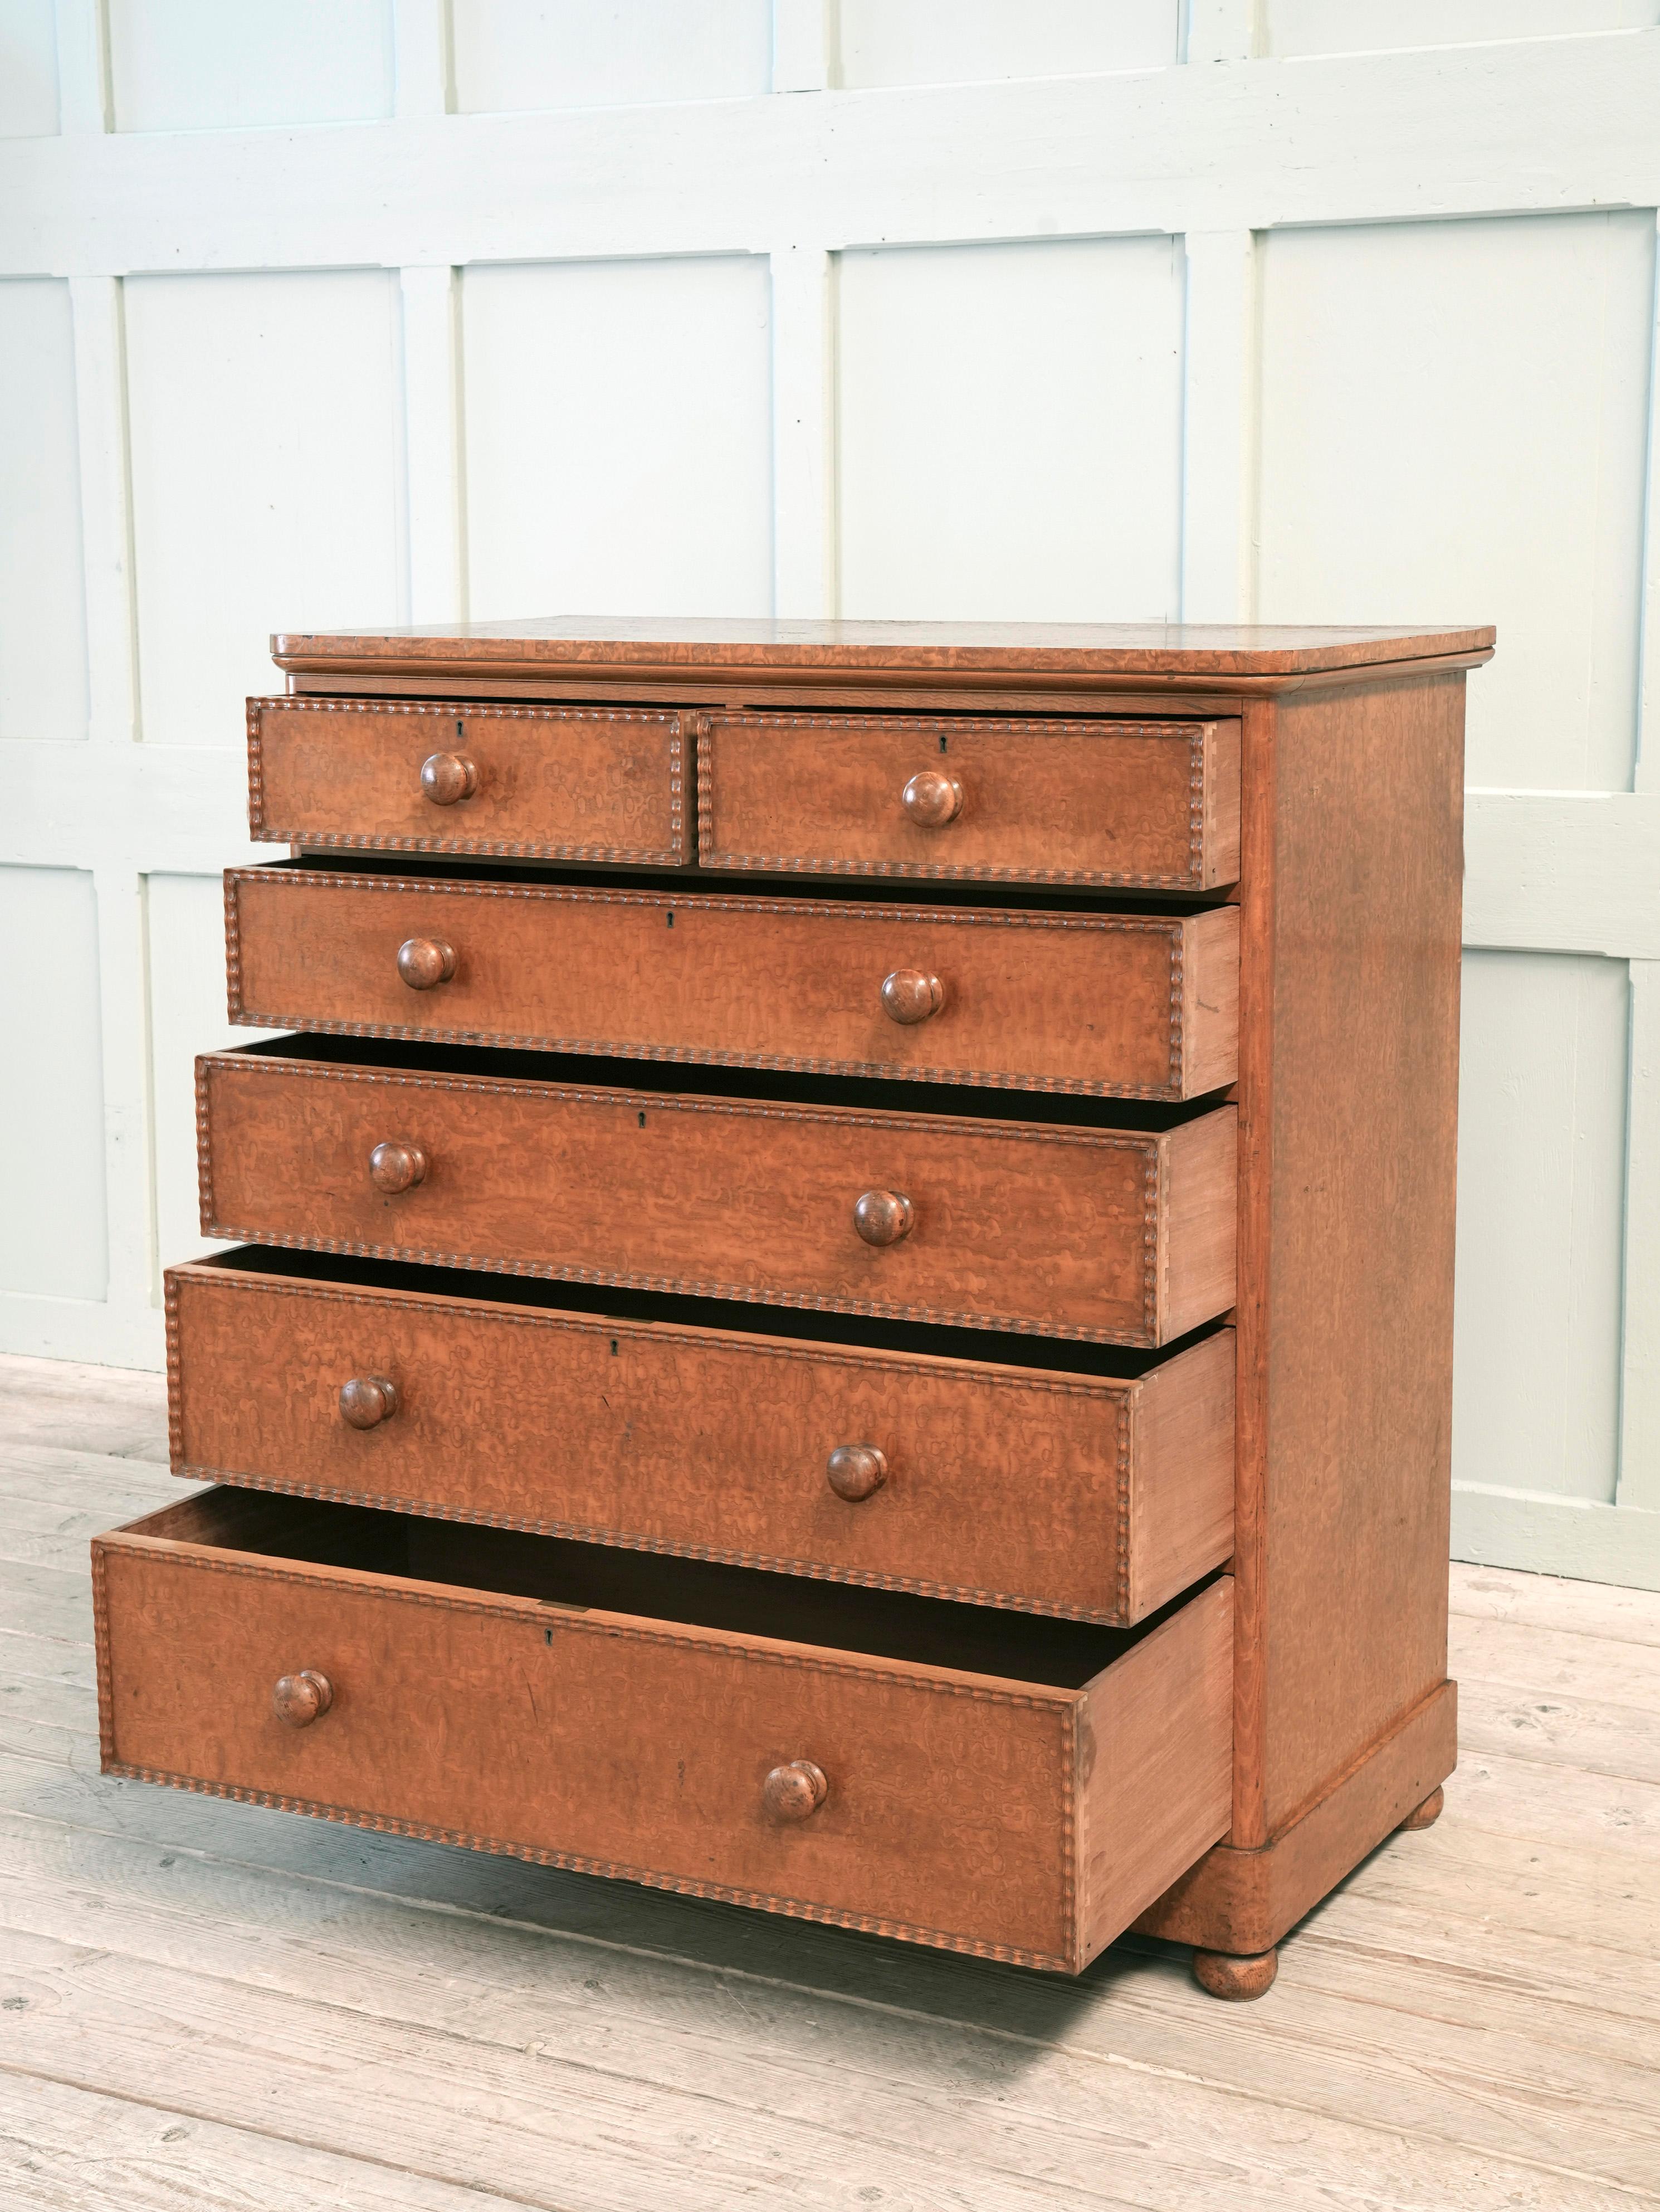 Burnished 19th Century Burr Ash Chest of Drawers